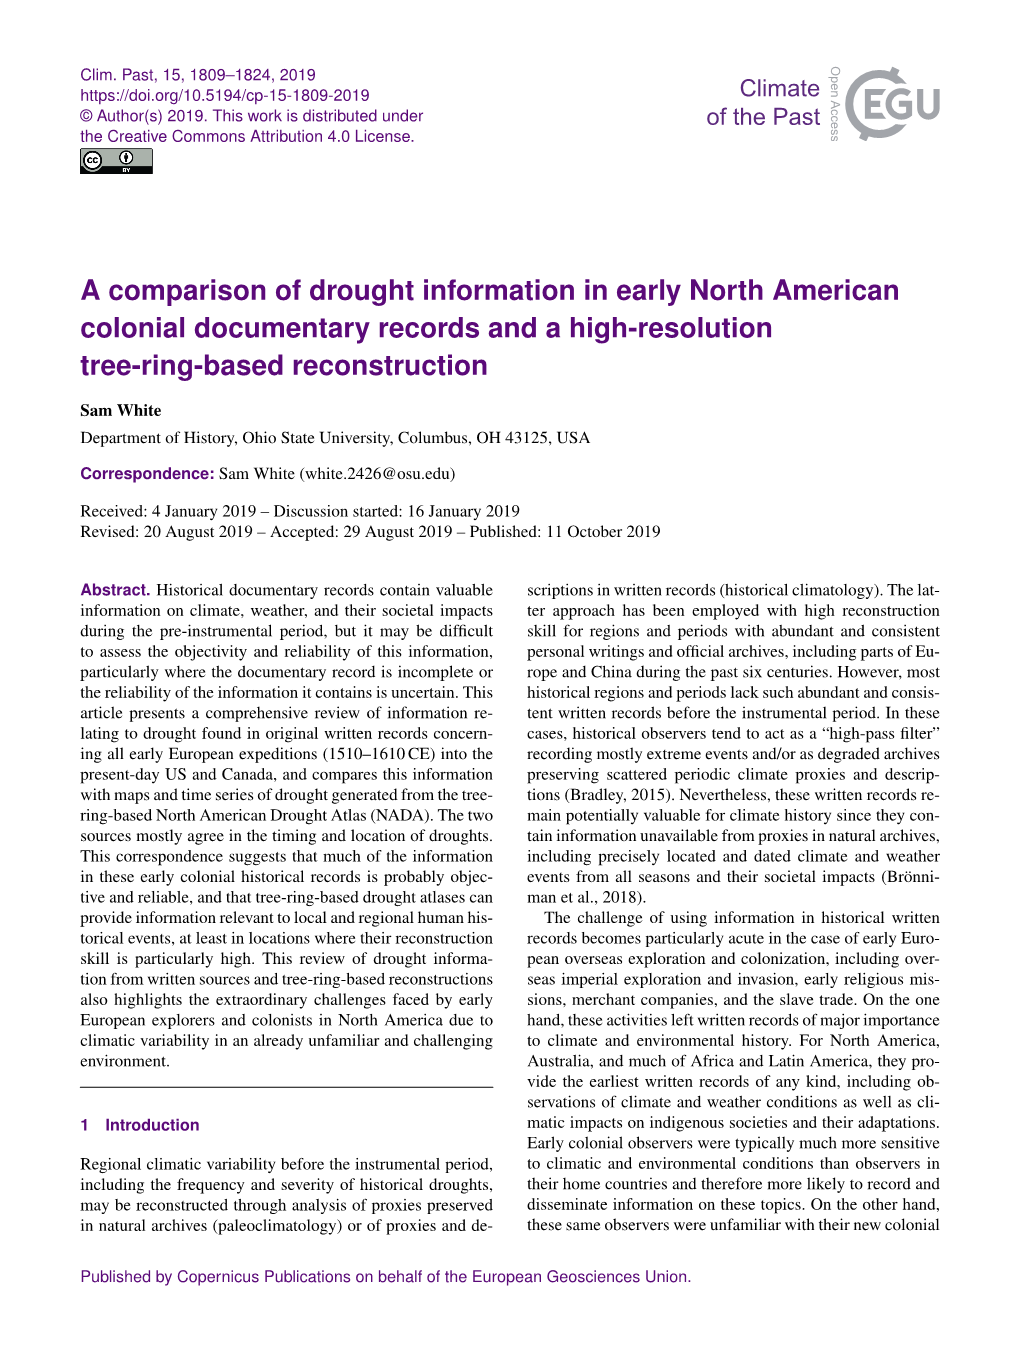 A Comparison of Drought Information in Early North American Colonial Documentary Records and a High-Resolution Tree-Ring-Based Reconstruction